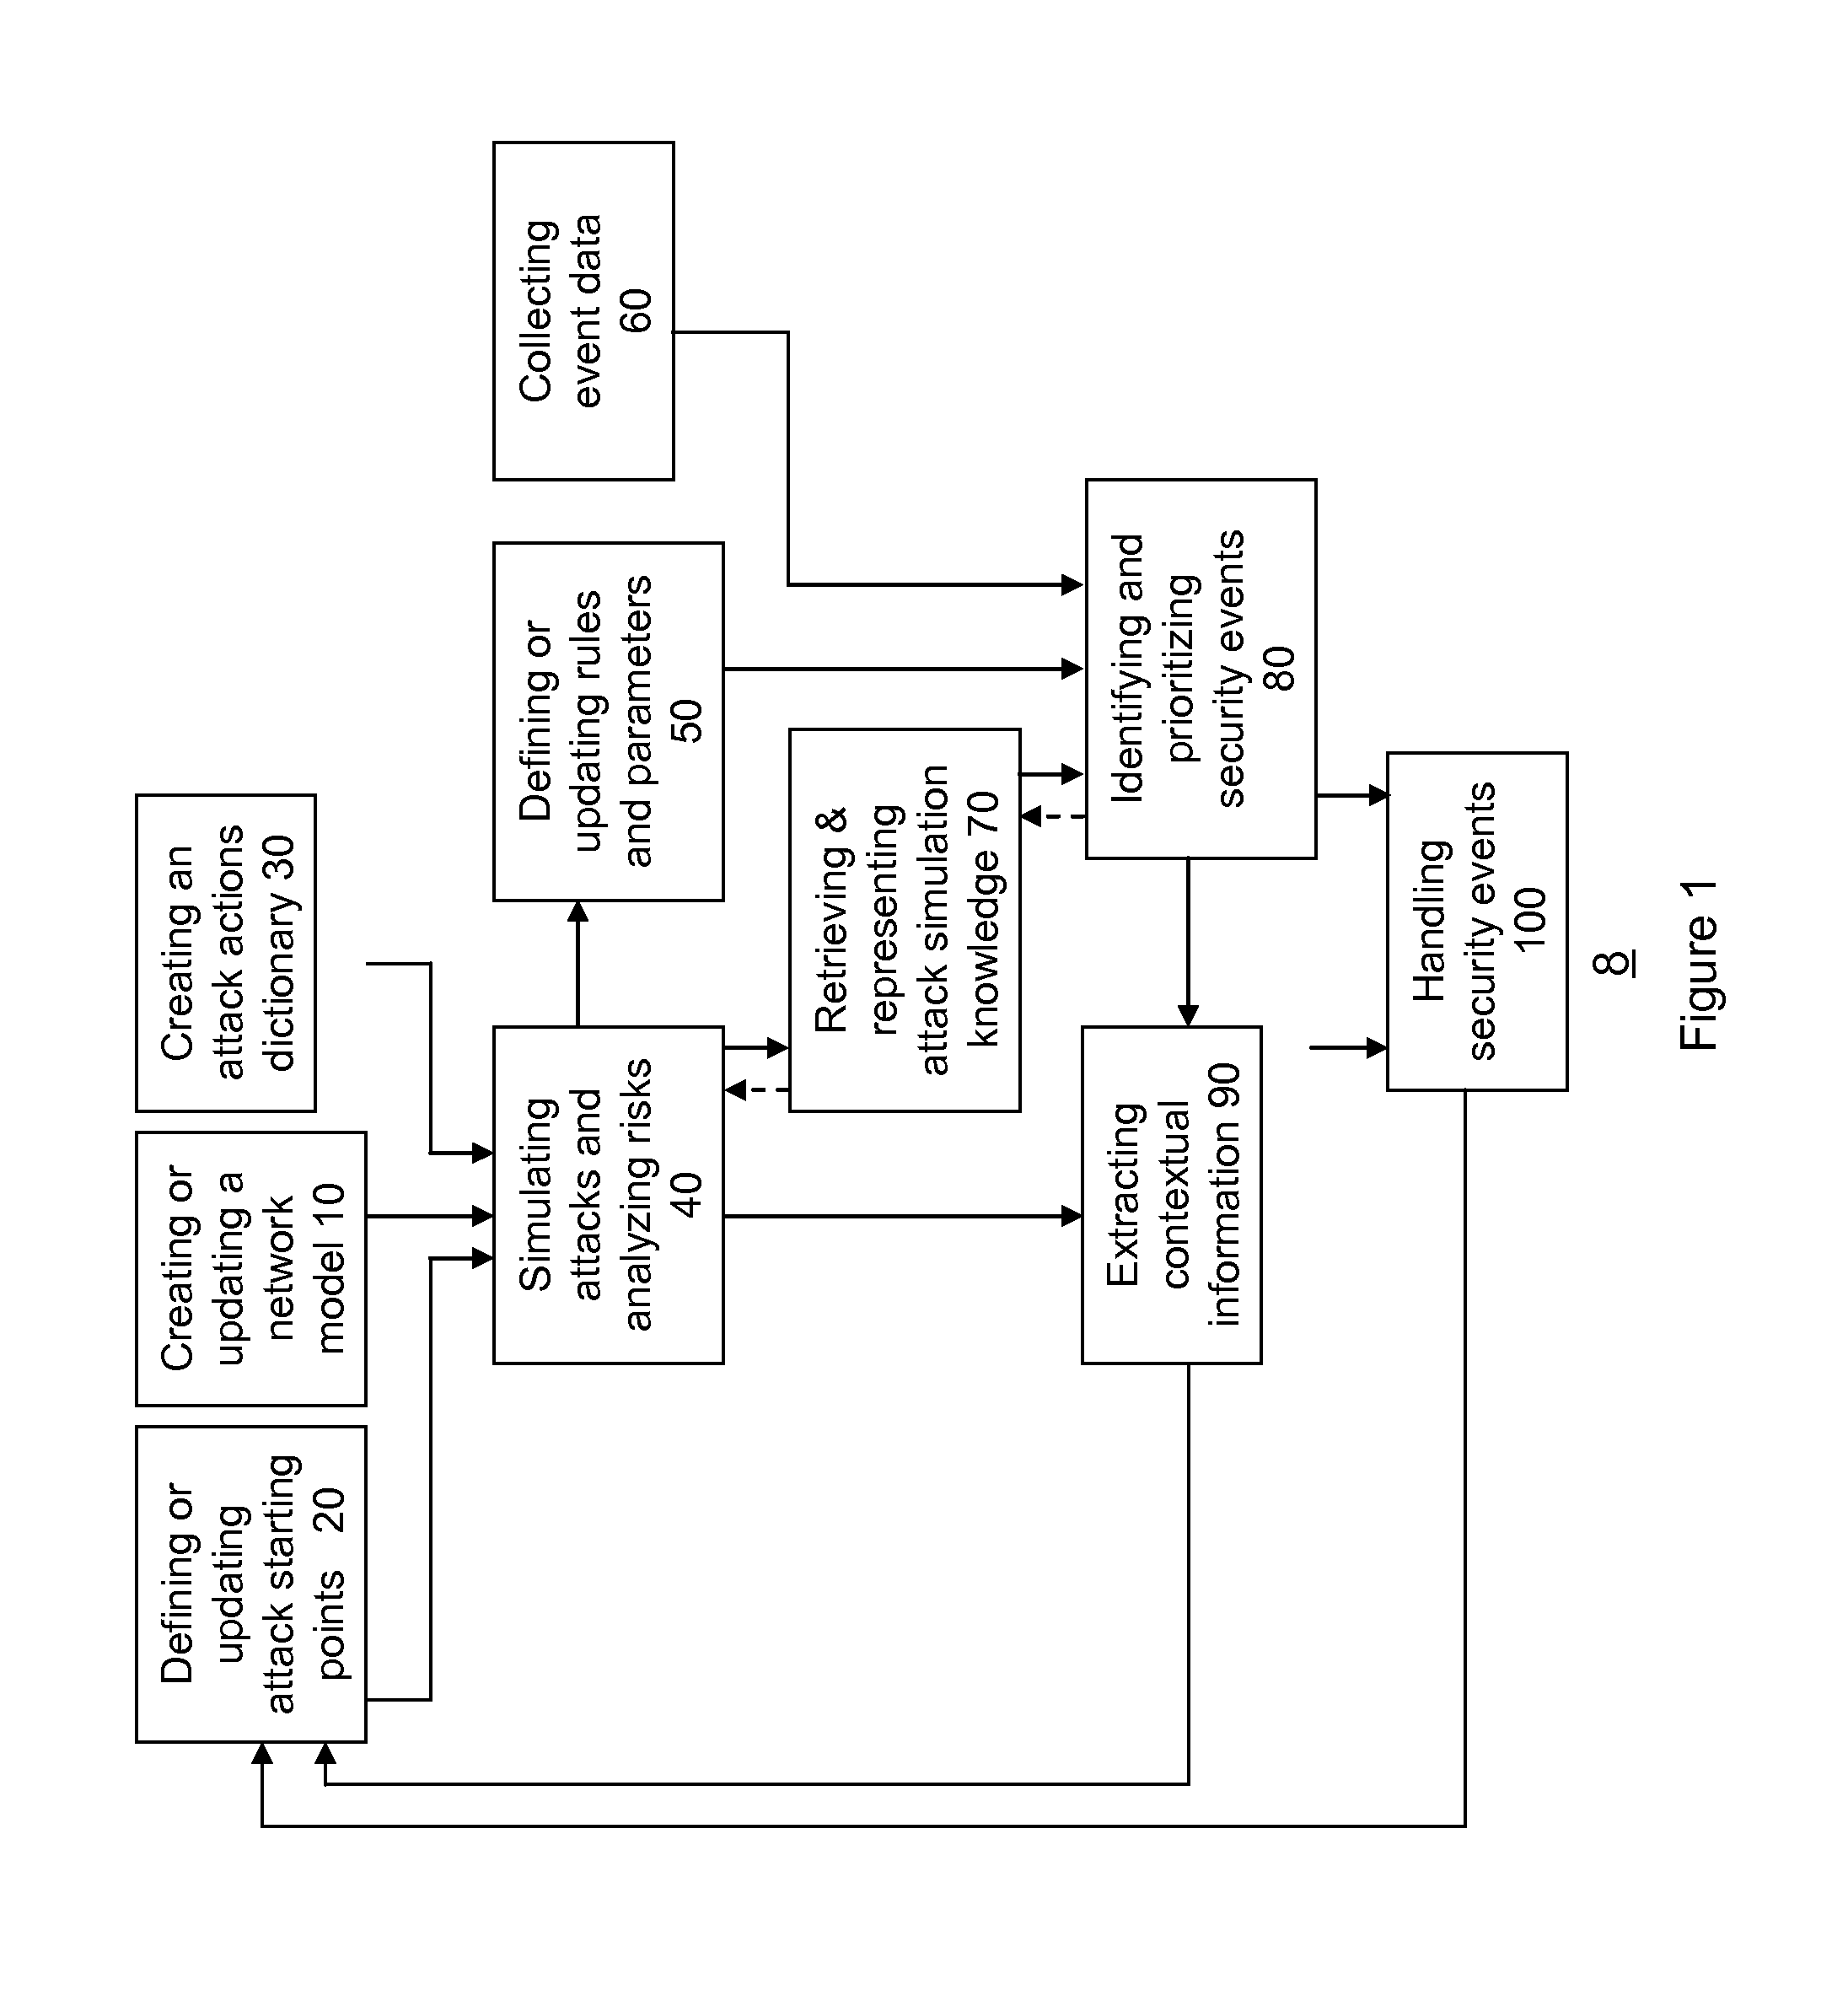 Method for simulation aided security event management